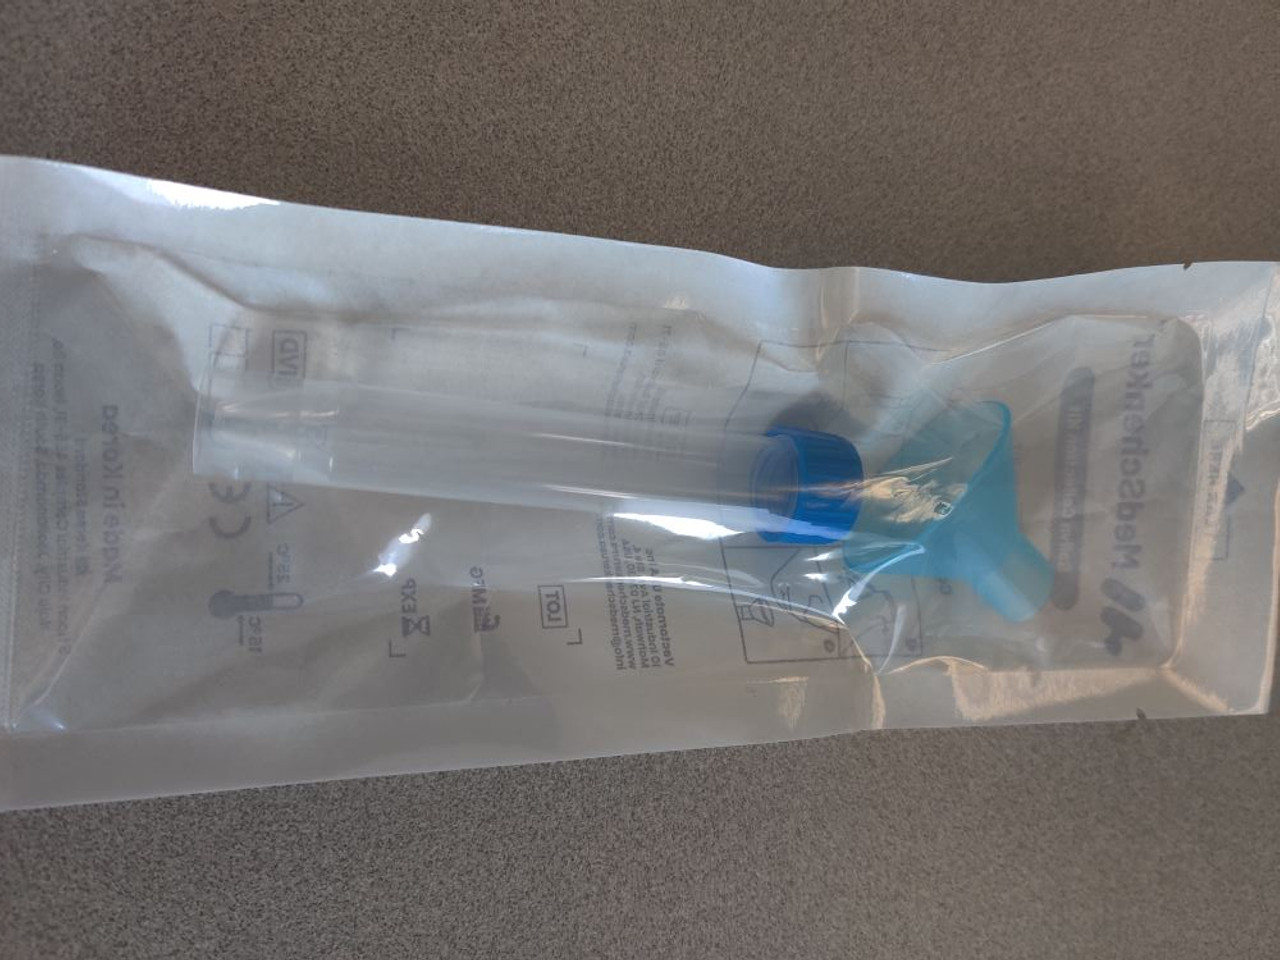 https://cdn11.bigcommerce.com/s-w9bdixgj/images/stencil/1280x1280/products/4092/9054/MedShenker_Sterile_Saliva_Collection_Tube_and_Funnel_For_Collecting_Saliva_for_Nucleic_Acid_qPCR_Testing_-_COVID_Testing_Supplies_-_Stellar_Scientific__88992.1619966407.jpg?c=2